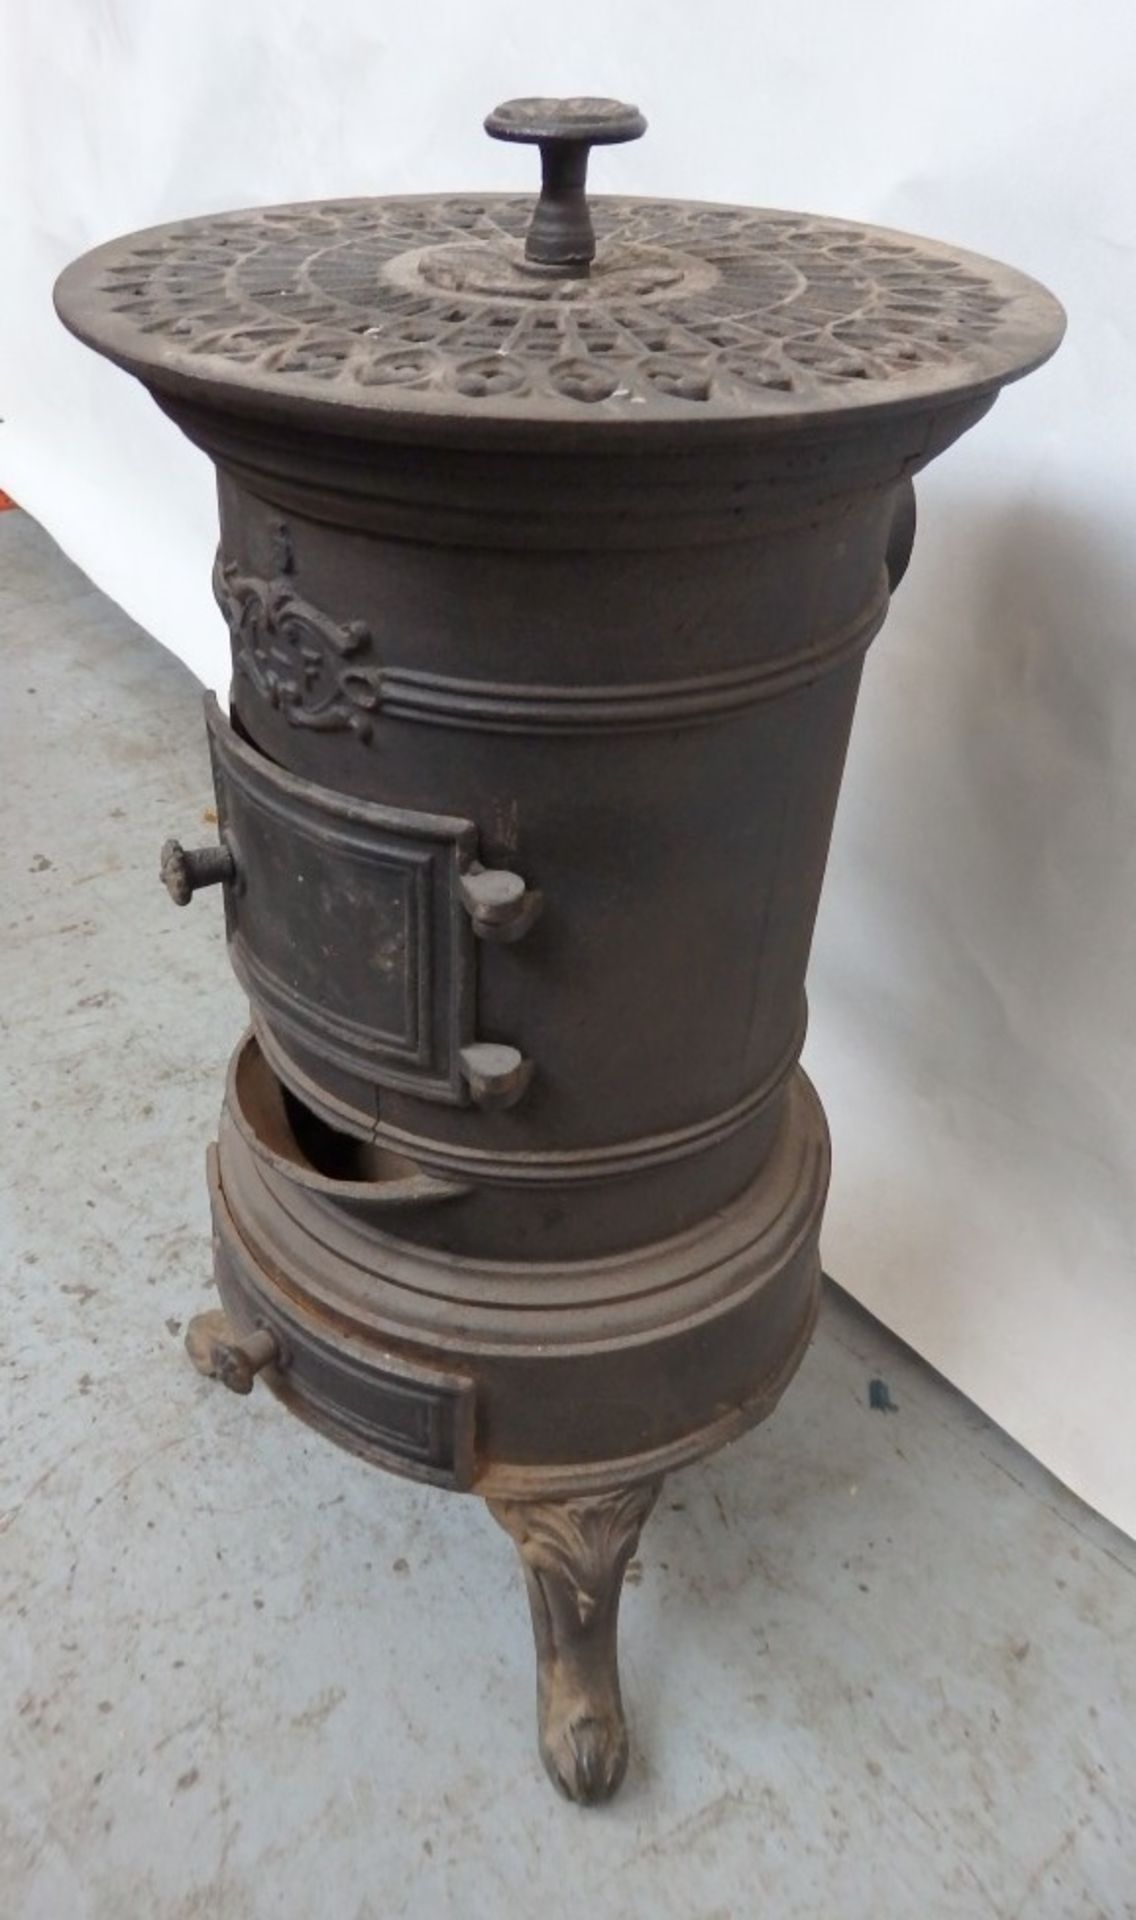 1 x Reclaimed Antique Cast Iron Potbelly Wood Burner / Stove - Dimensions: H61, Diameter 30cm - - Image 12 of 18